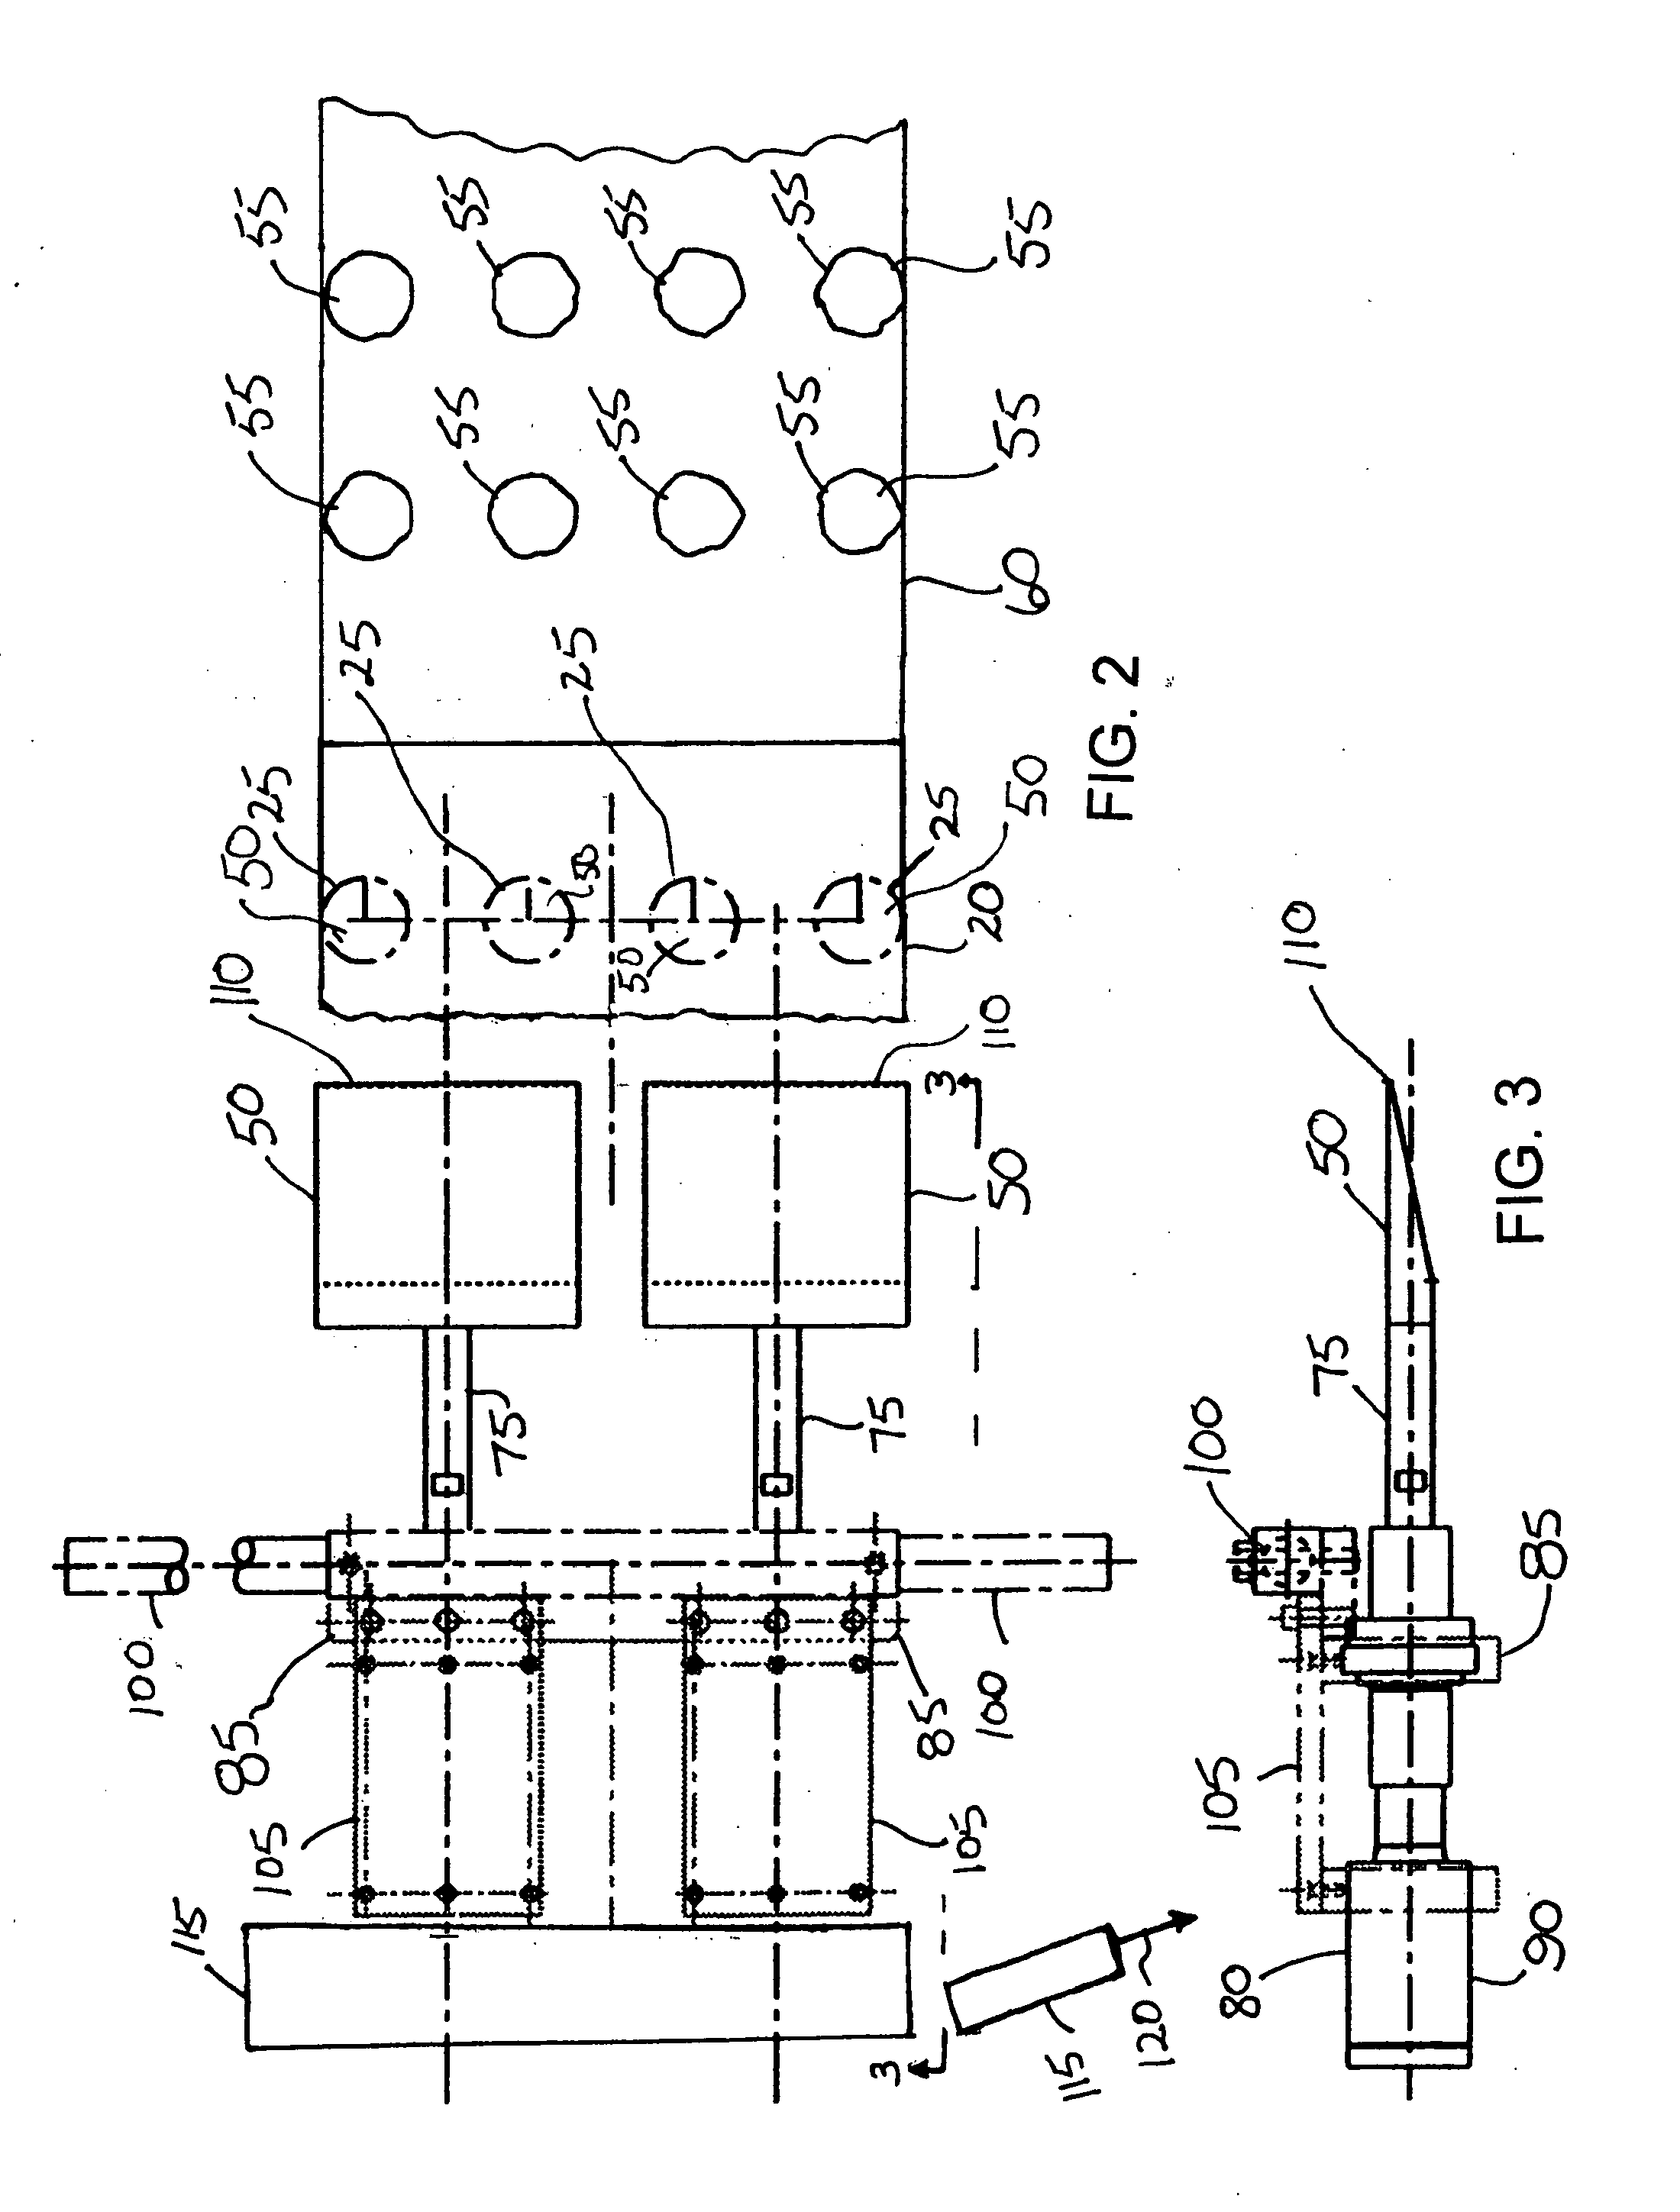 Production of cookies having large particulates using ultrasonic wirecutting